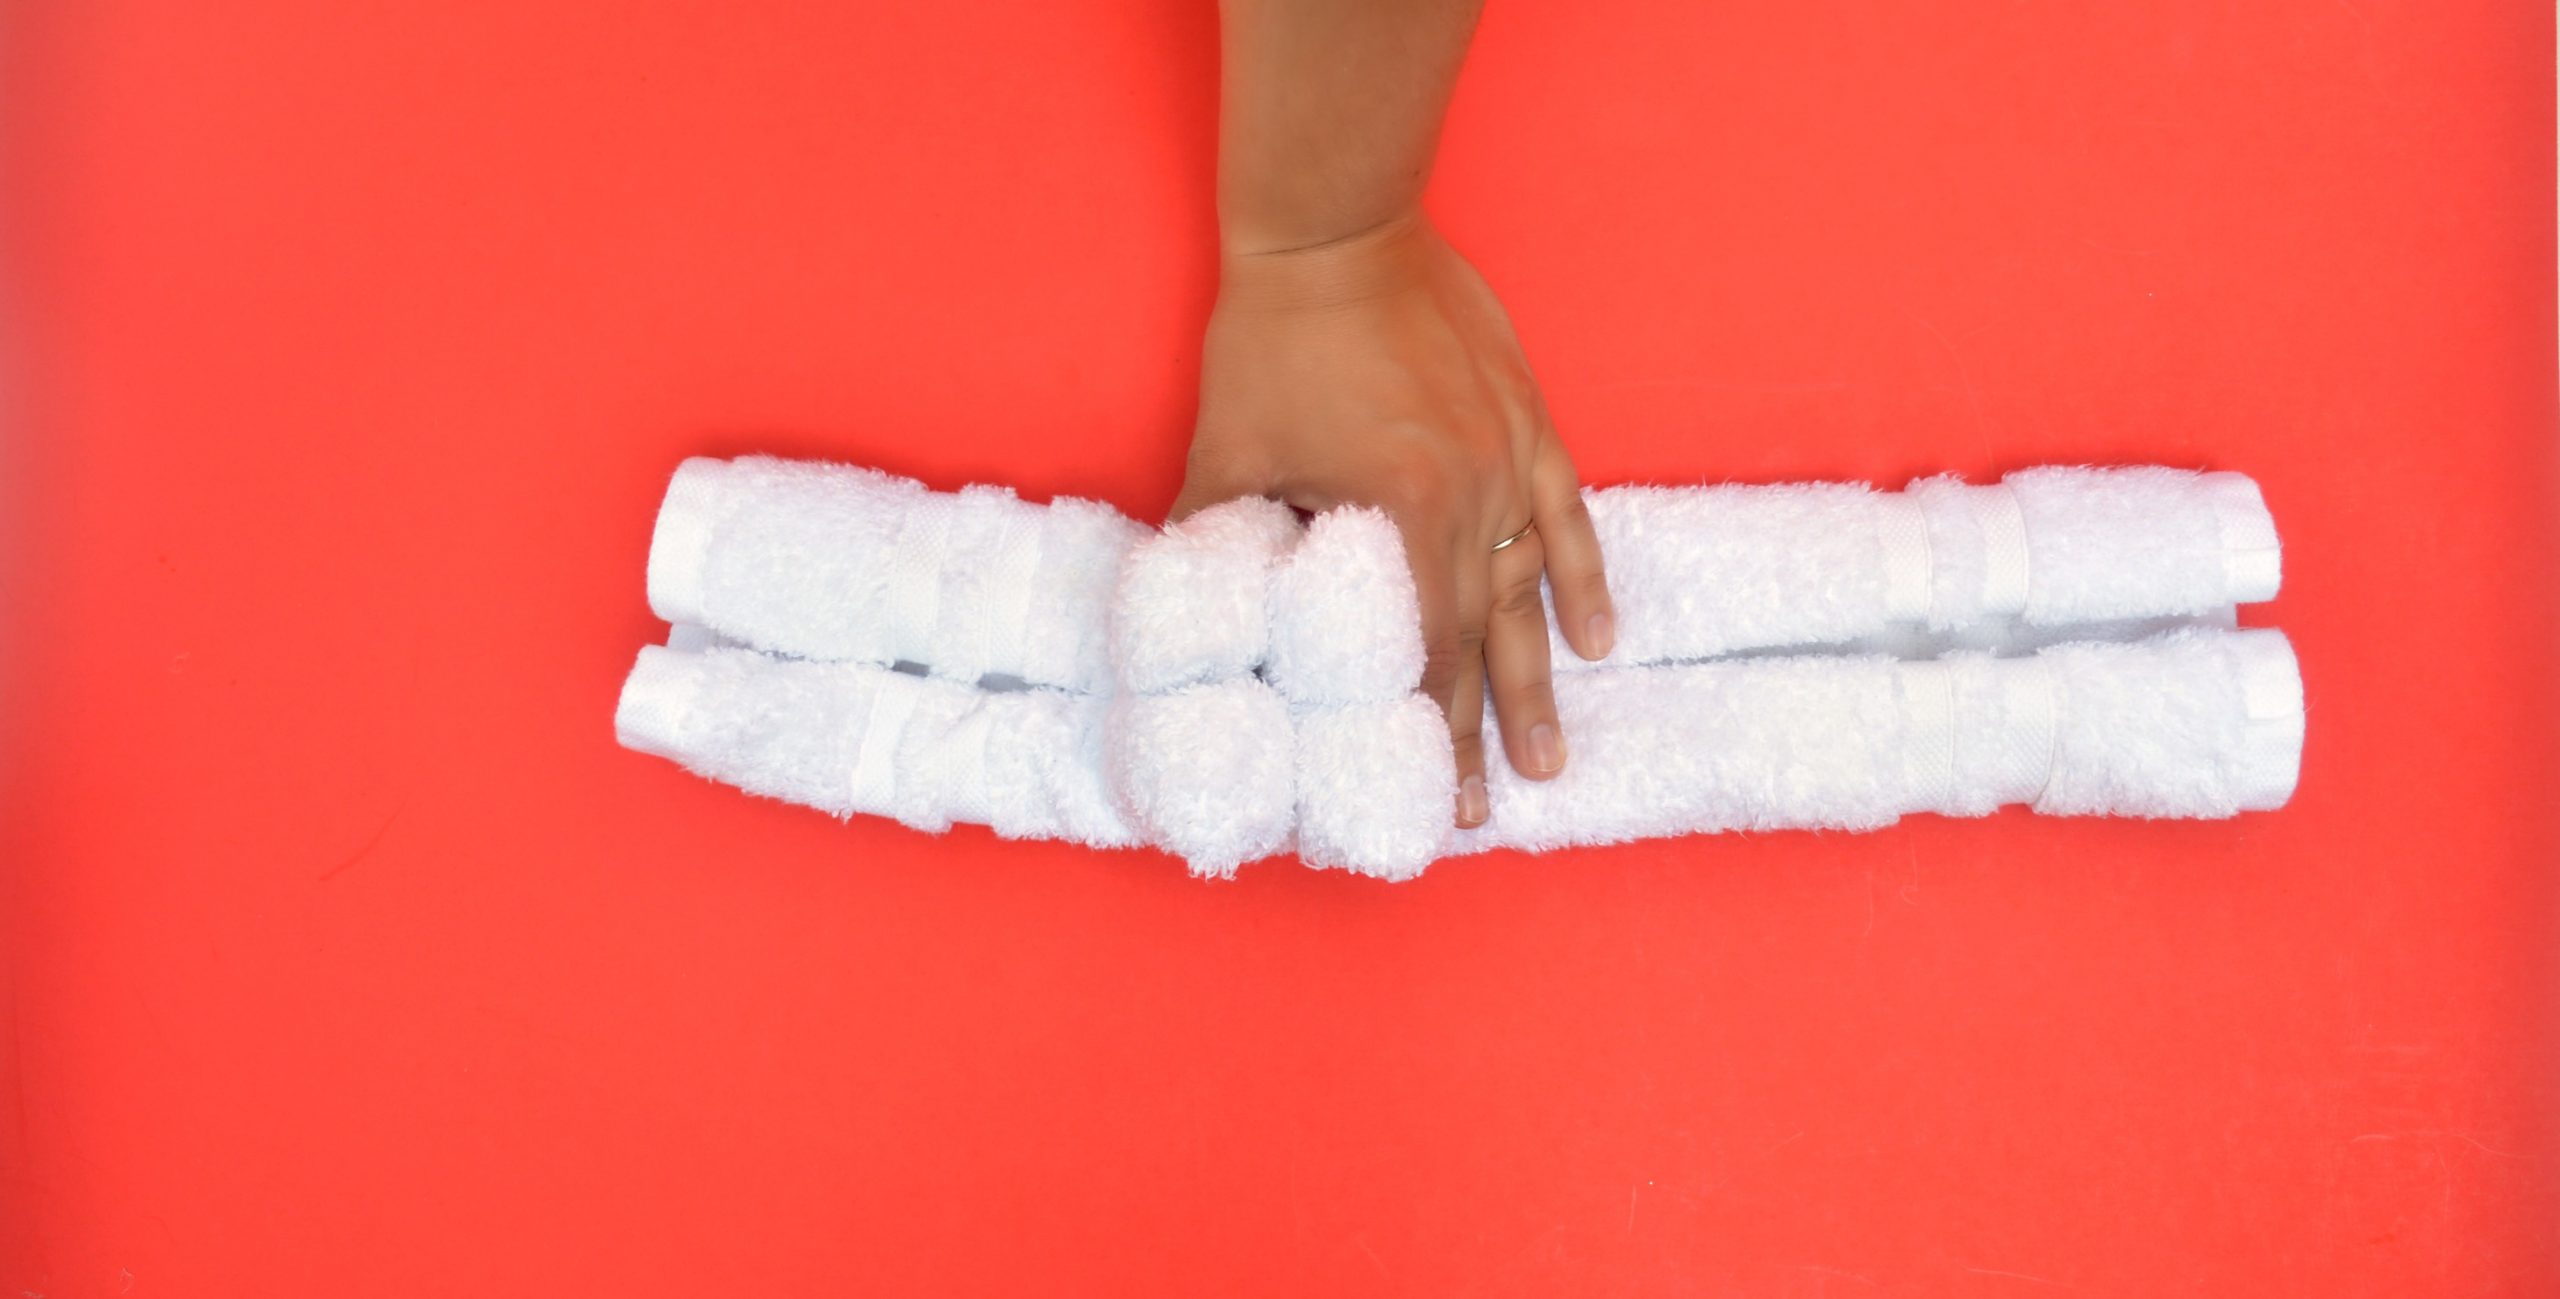 hand folding a towel on a red background